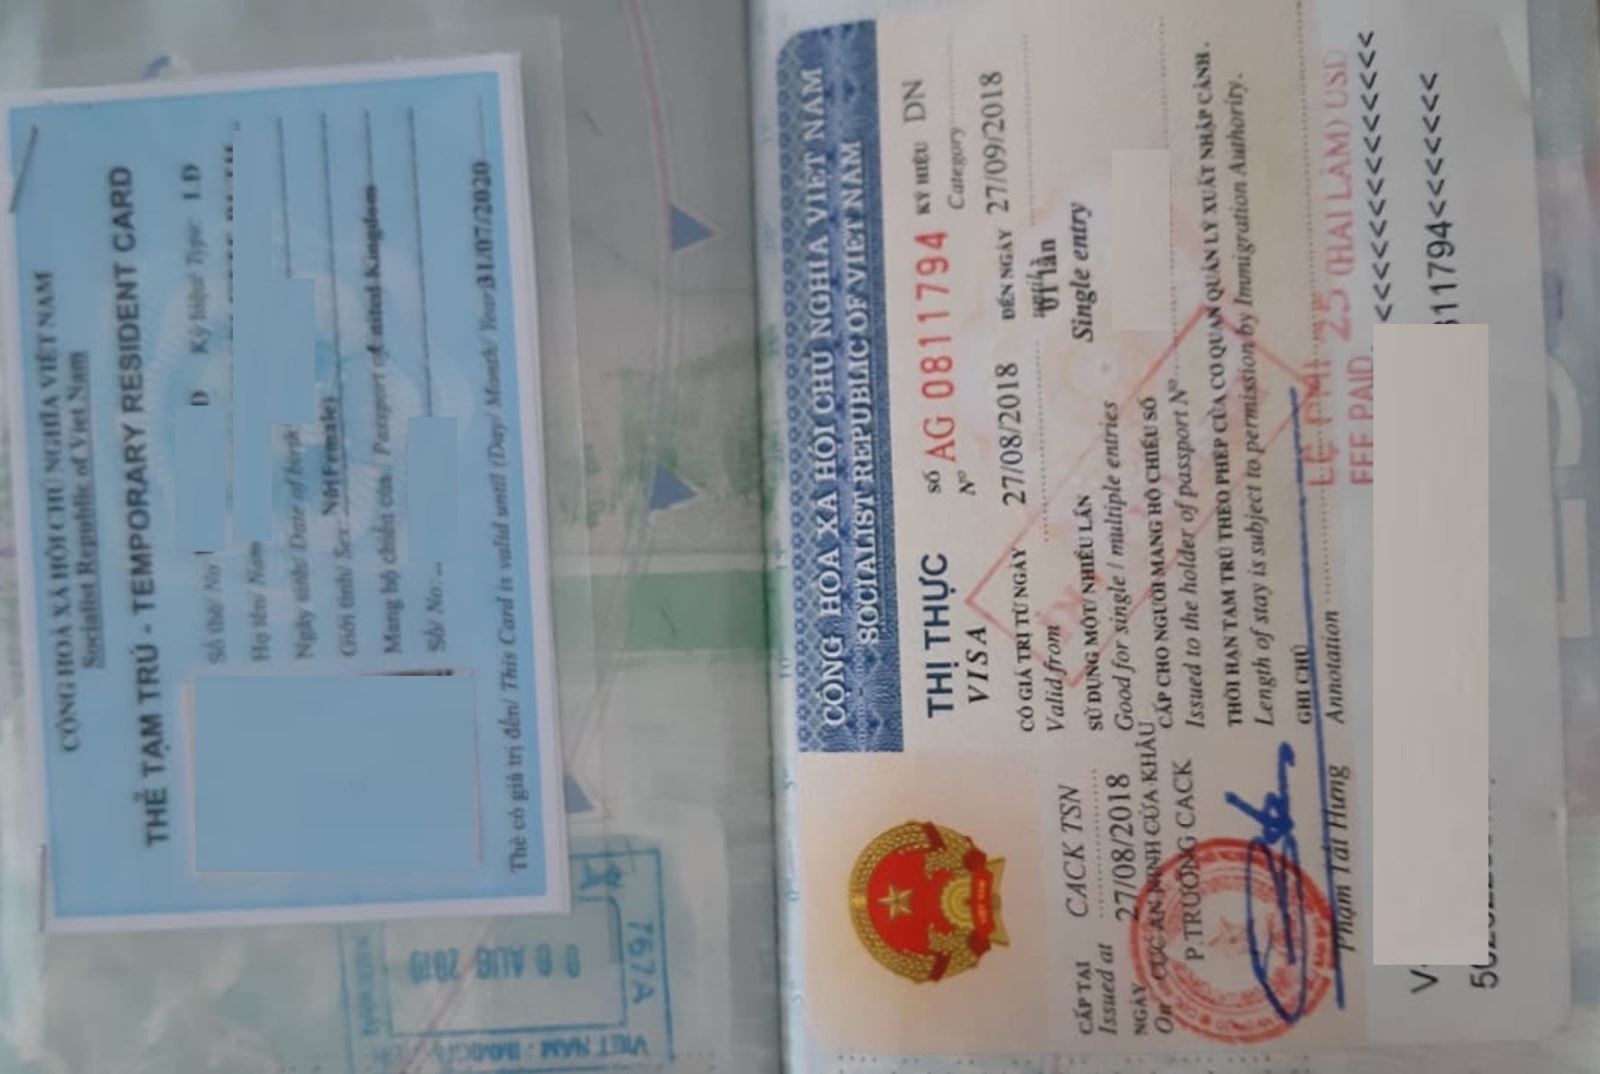 Can foreigners be considered having their Vietnamese visa repurposed?